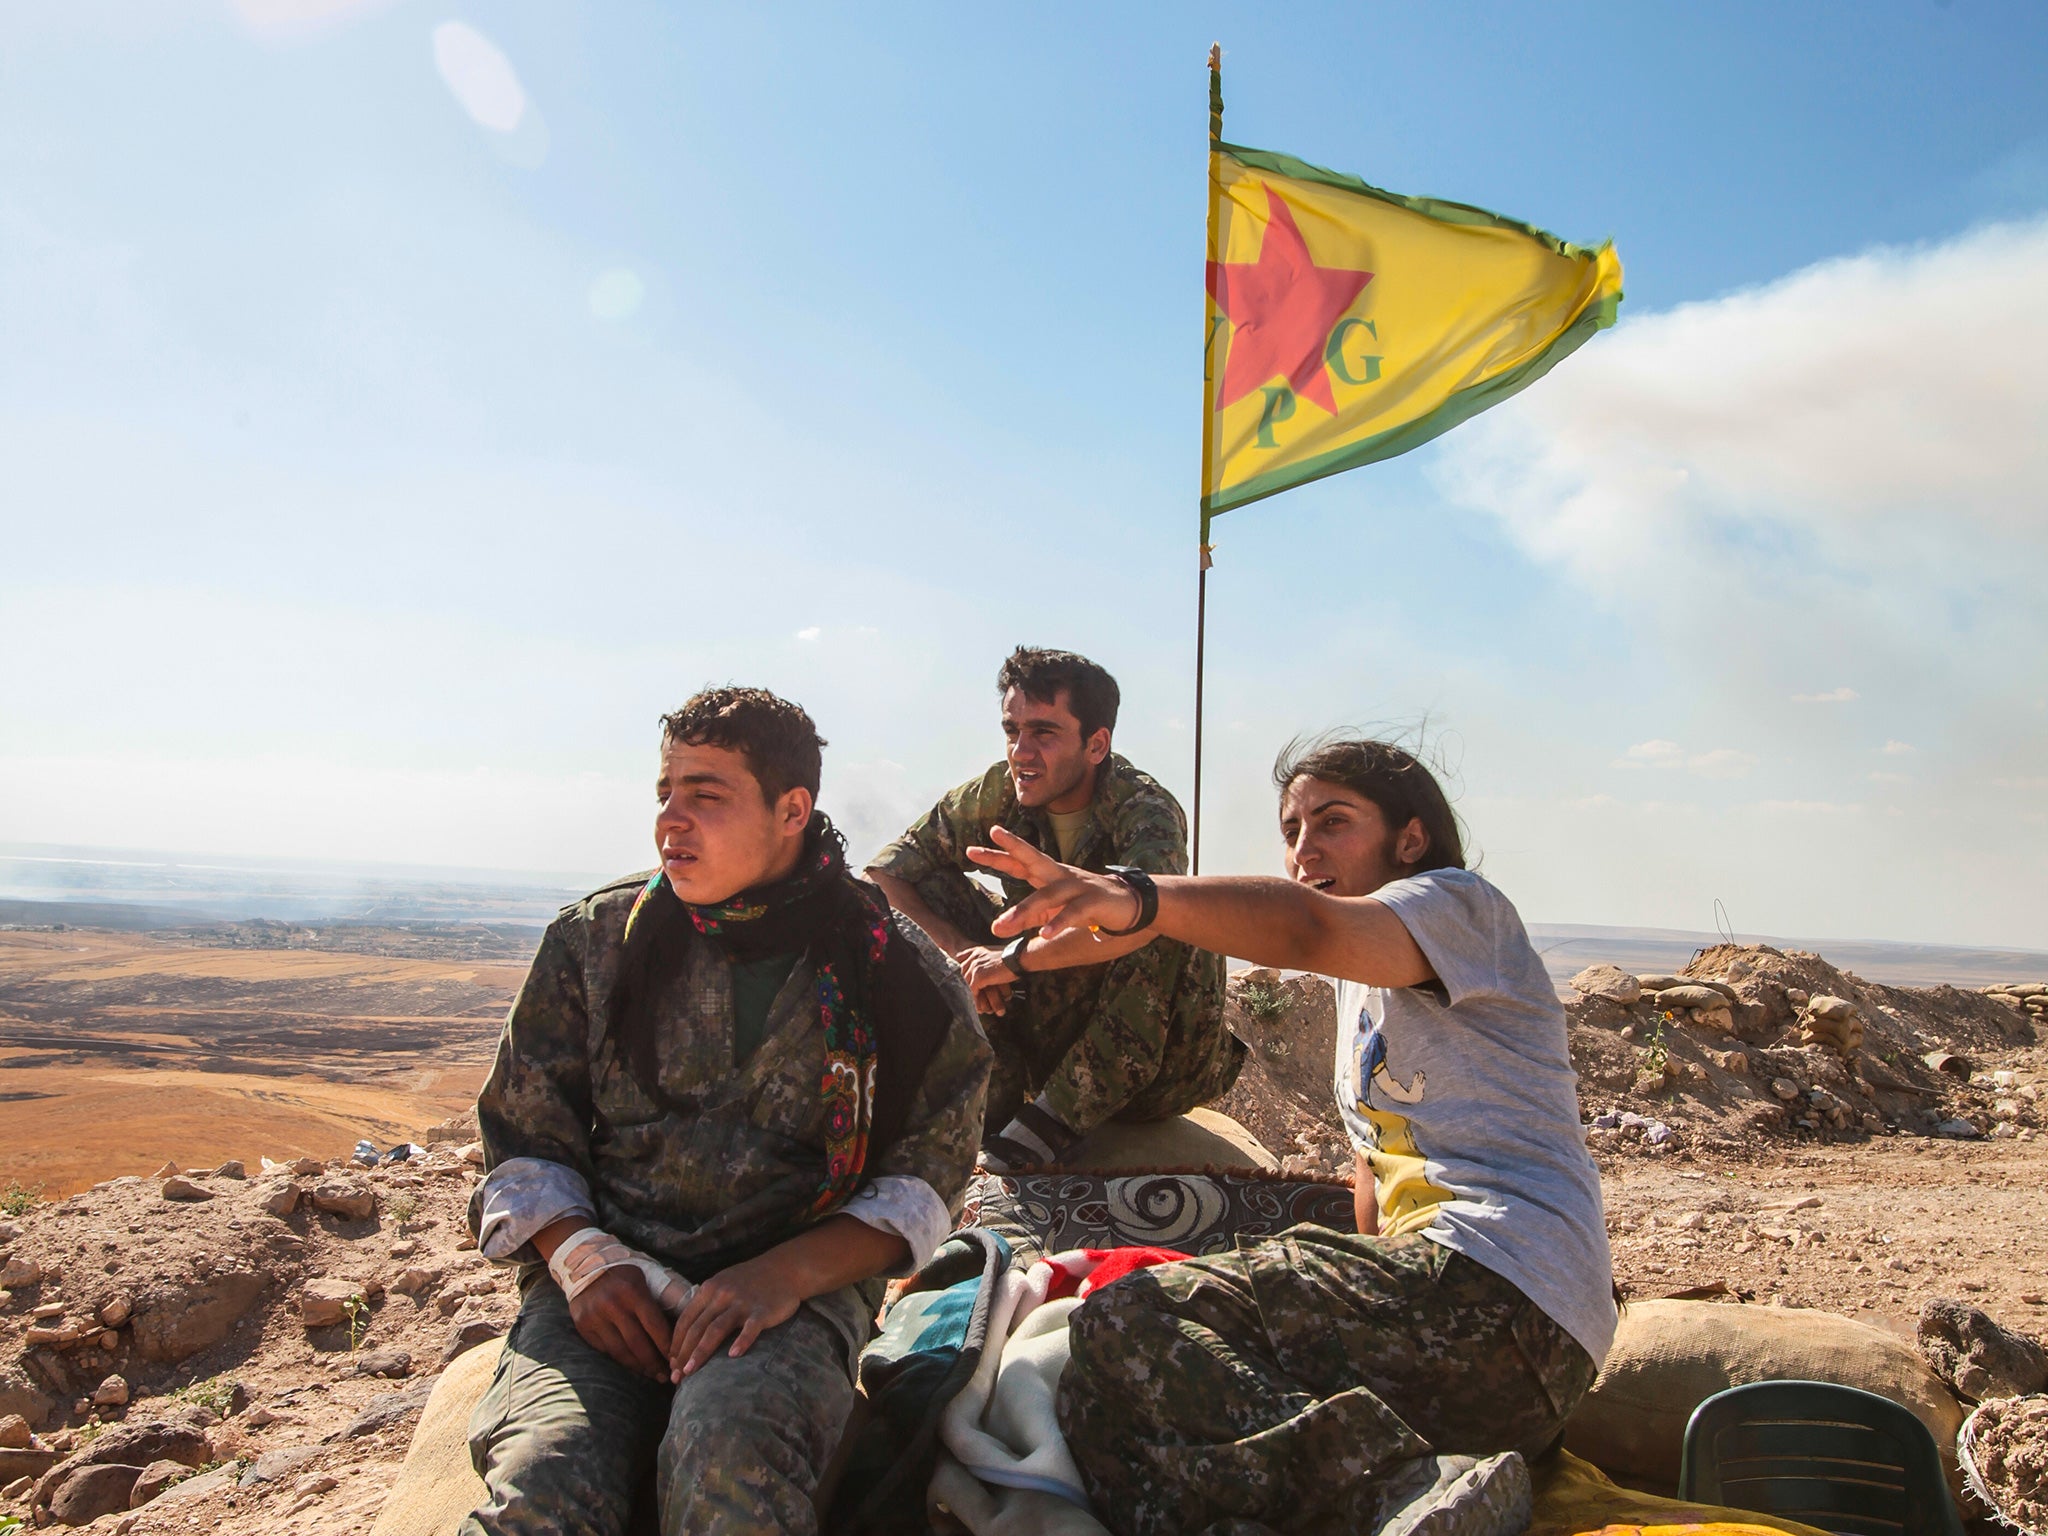 YPG fighters stand guard near Kobane, Syria. Turkey claims the group is too closely linked with the outlawed PKK